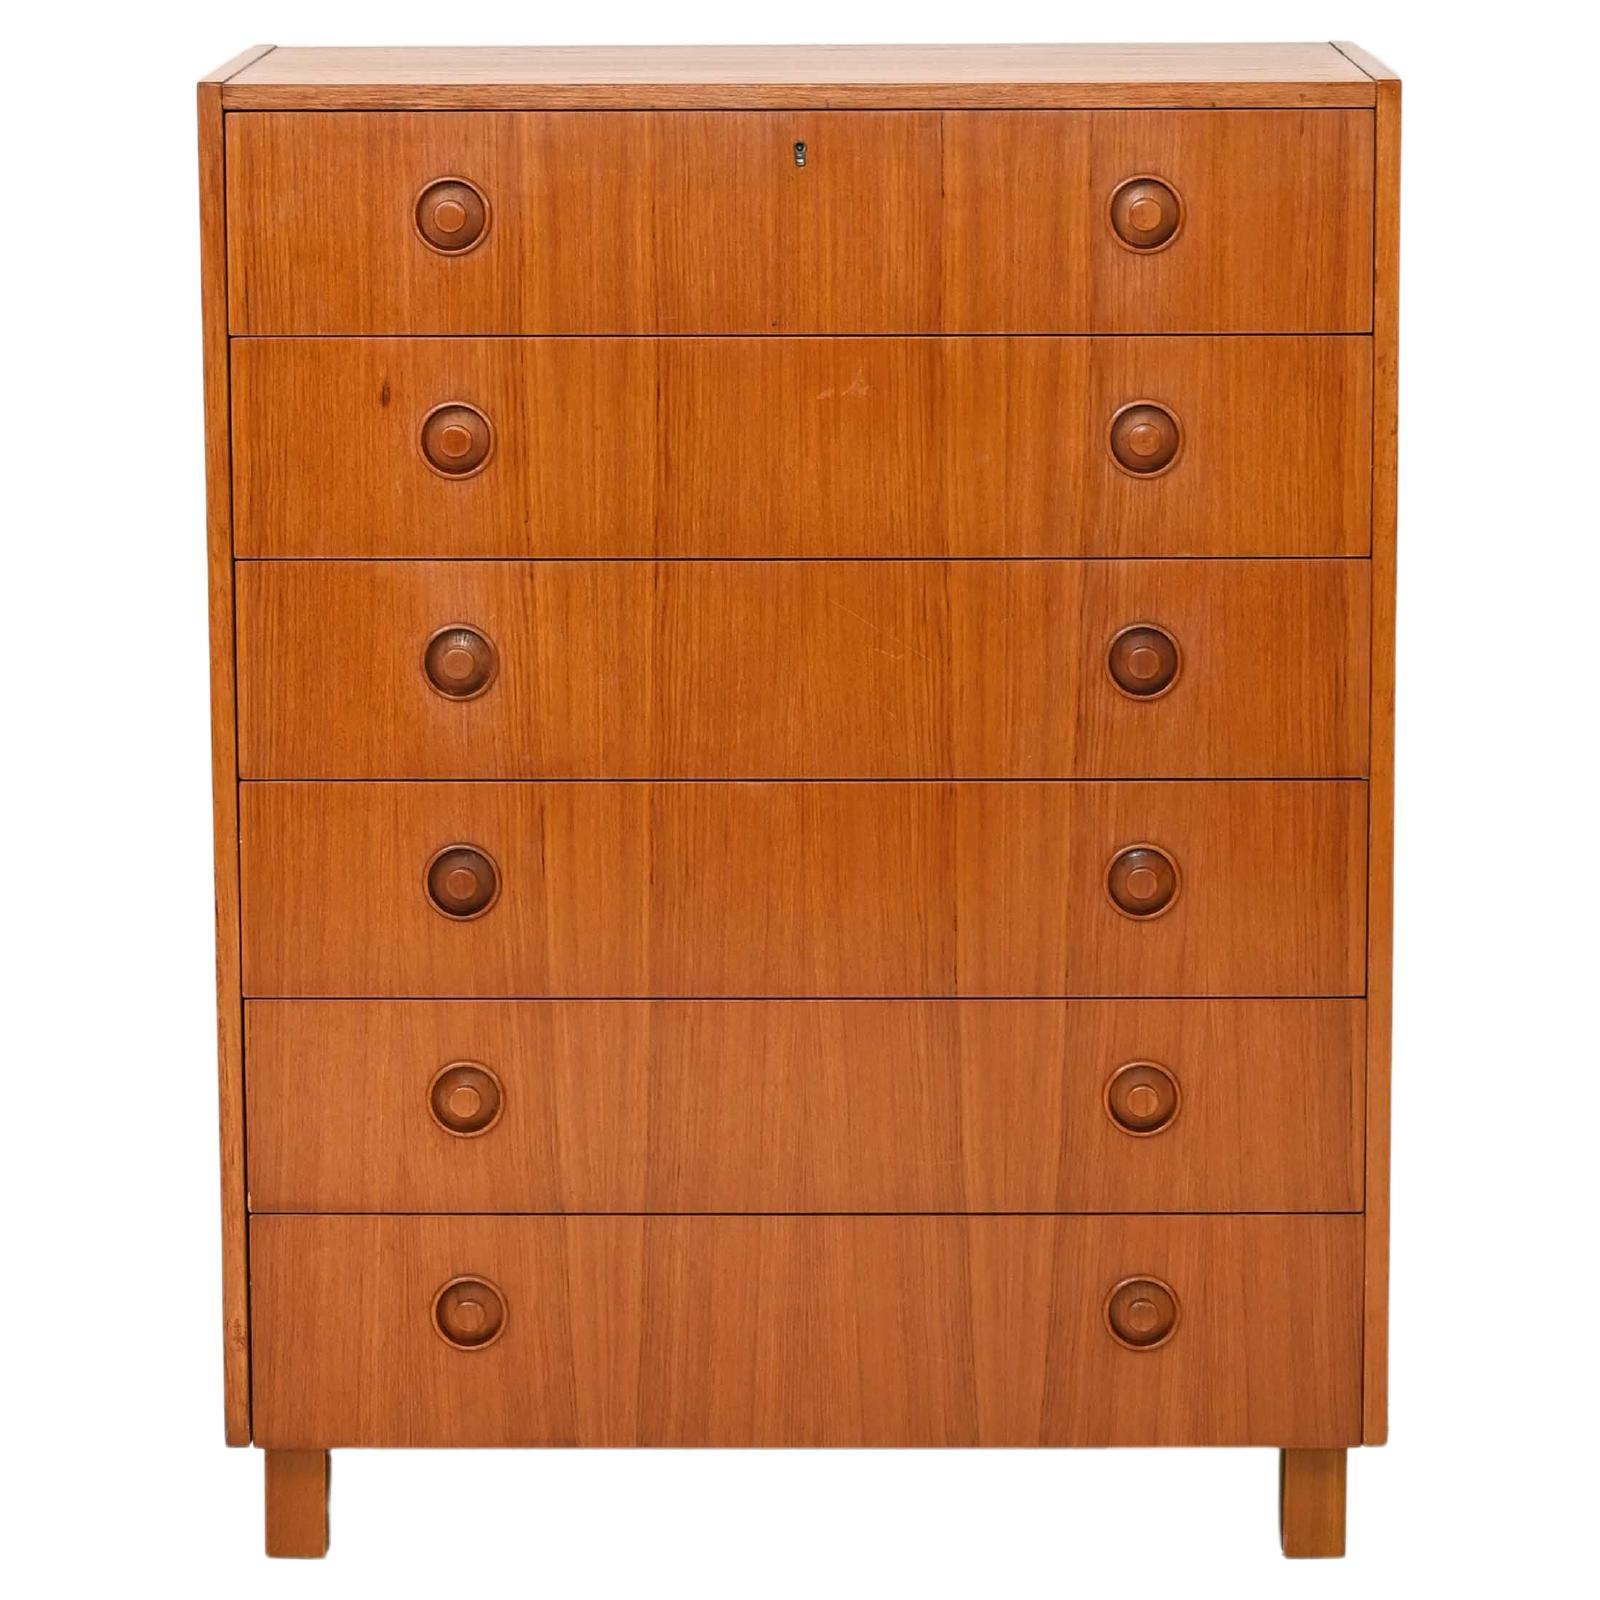 Tall Teak Chest of Drawers with Wooden Knobs